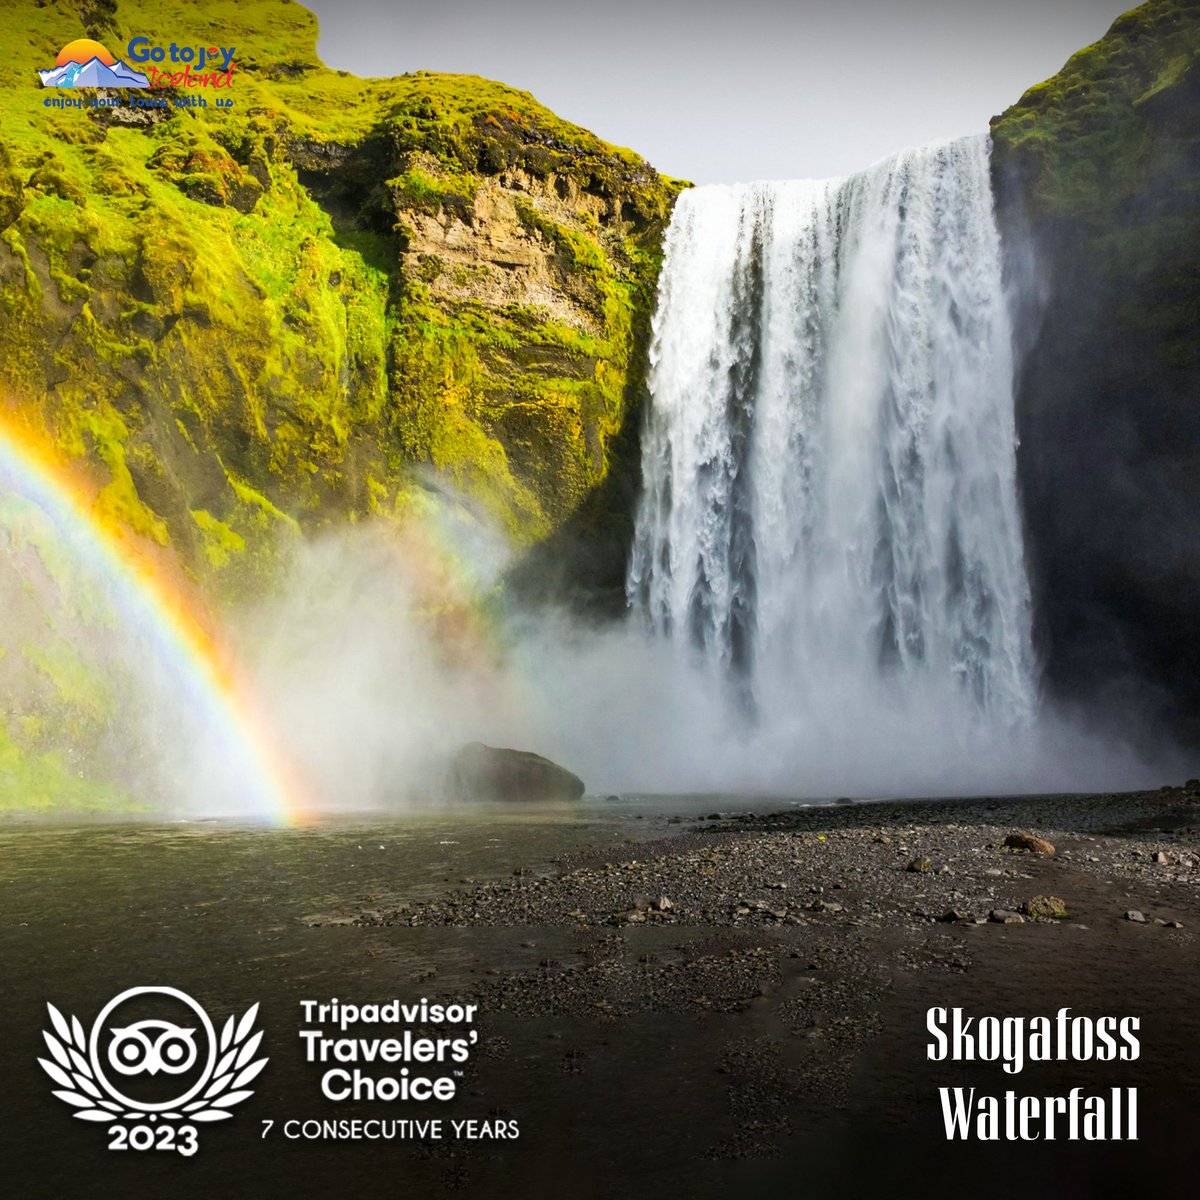 Is Skogafoss Waterfall one of your bucket list places in Iceland? ❤️🤩
The striking Skogafoss waterfall is easily accessible and located on Iceland's south coast. 

Book now 👉 bit.ly/4ag7G9m

#iceland #travel #photography #visiticeland #visitingiceland #traveliceland